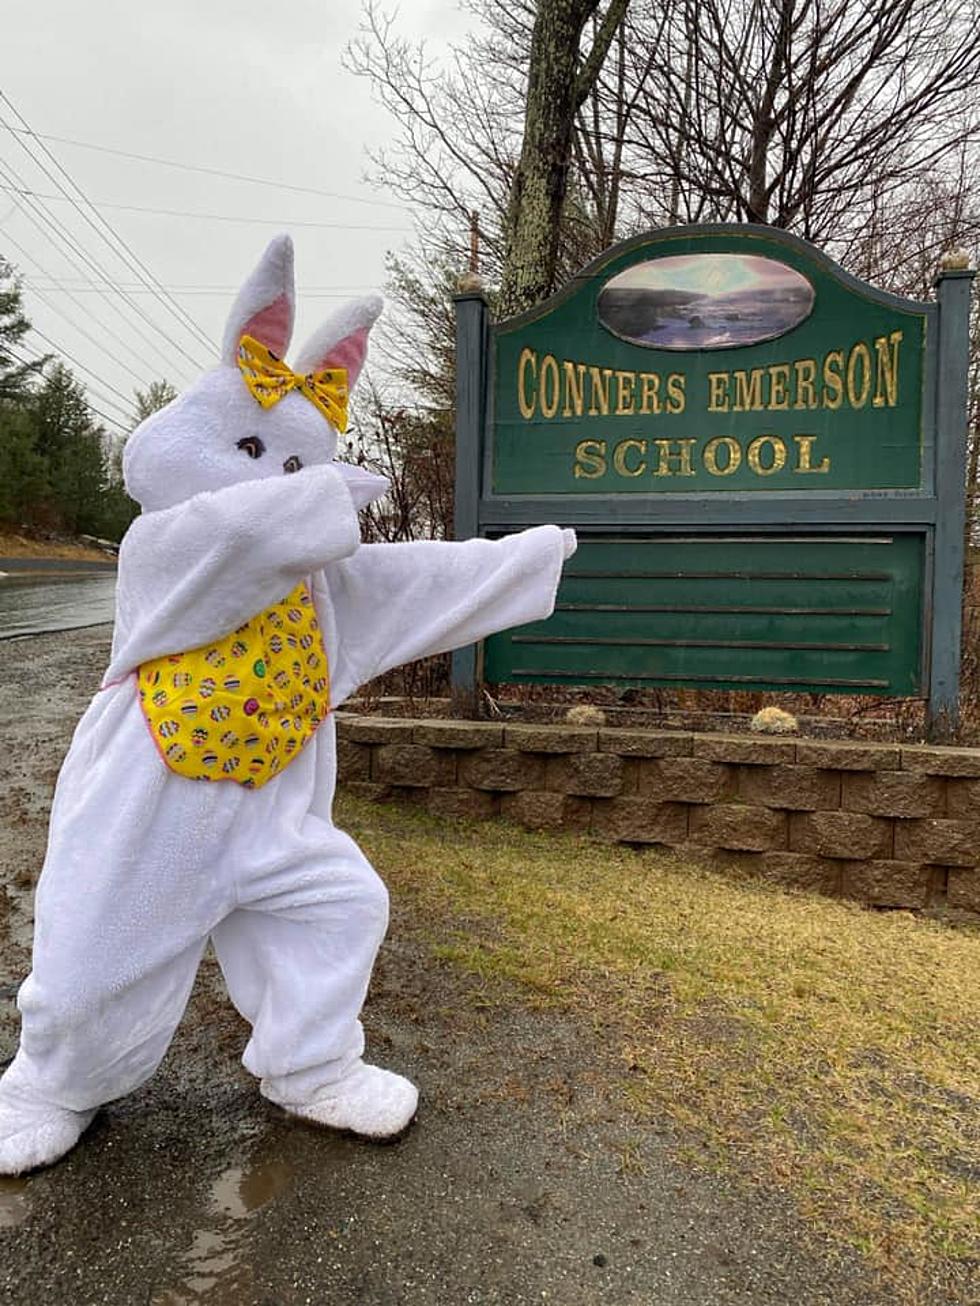 Easter Bunny Makes a Surprise Appearance at Conners-Emerson School on Rabbit Rabbit Day